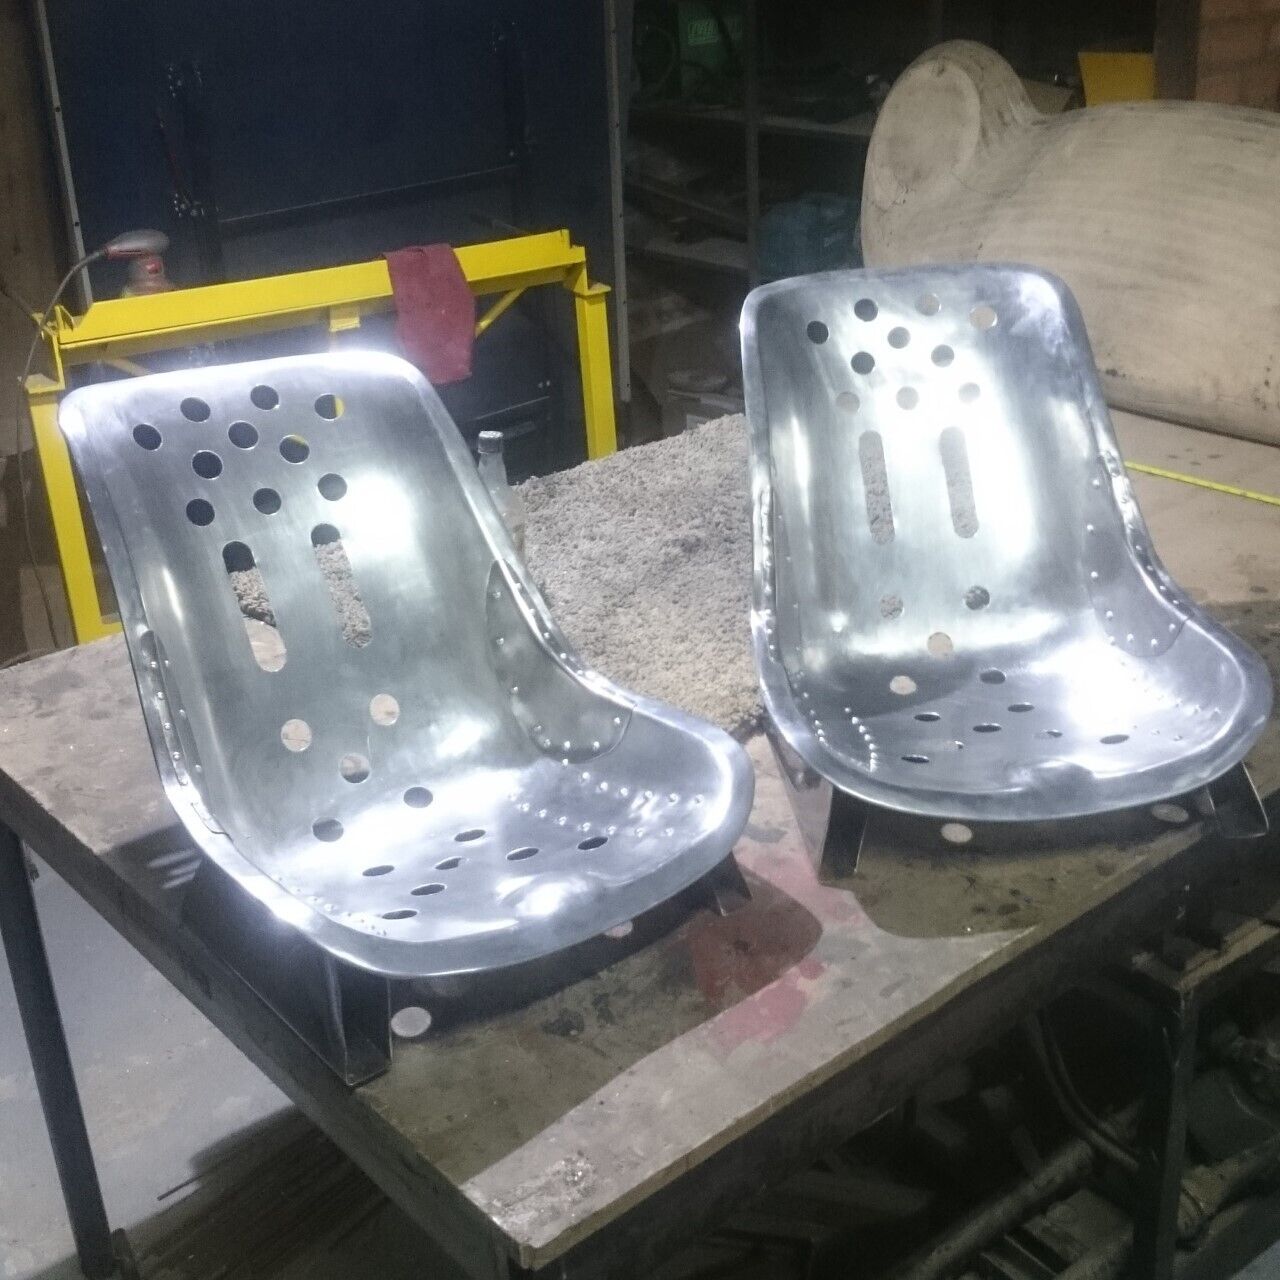 PAIR of Porsche 356 1955-58 Speedster Seats - POLISHED or RAW Aluminum finish